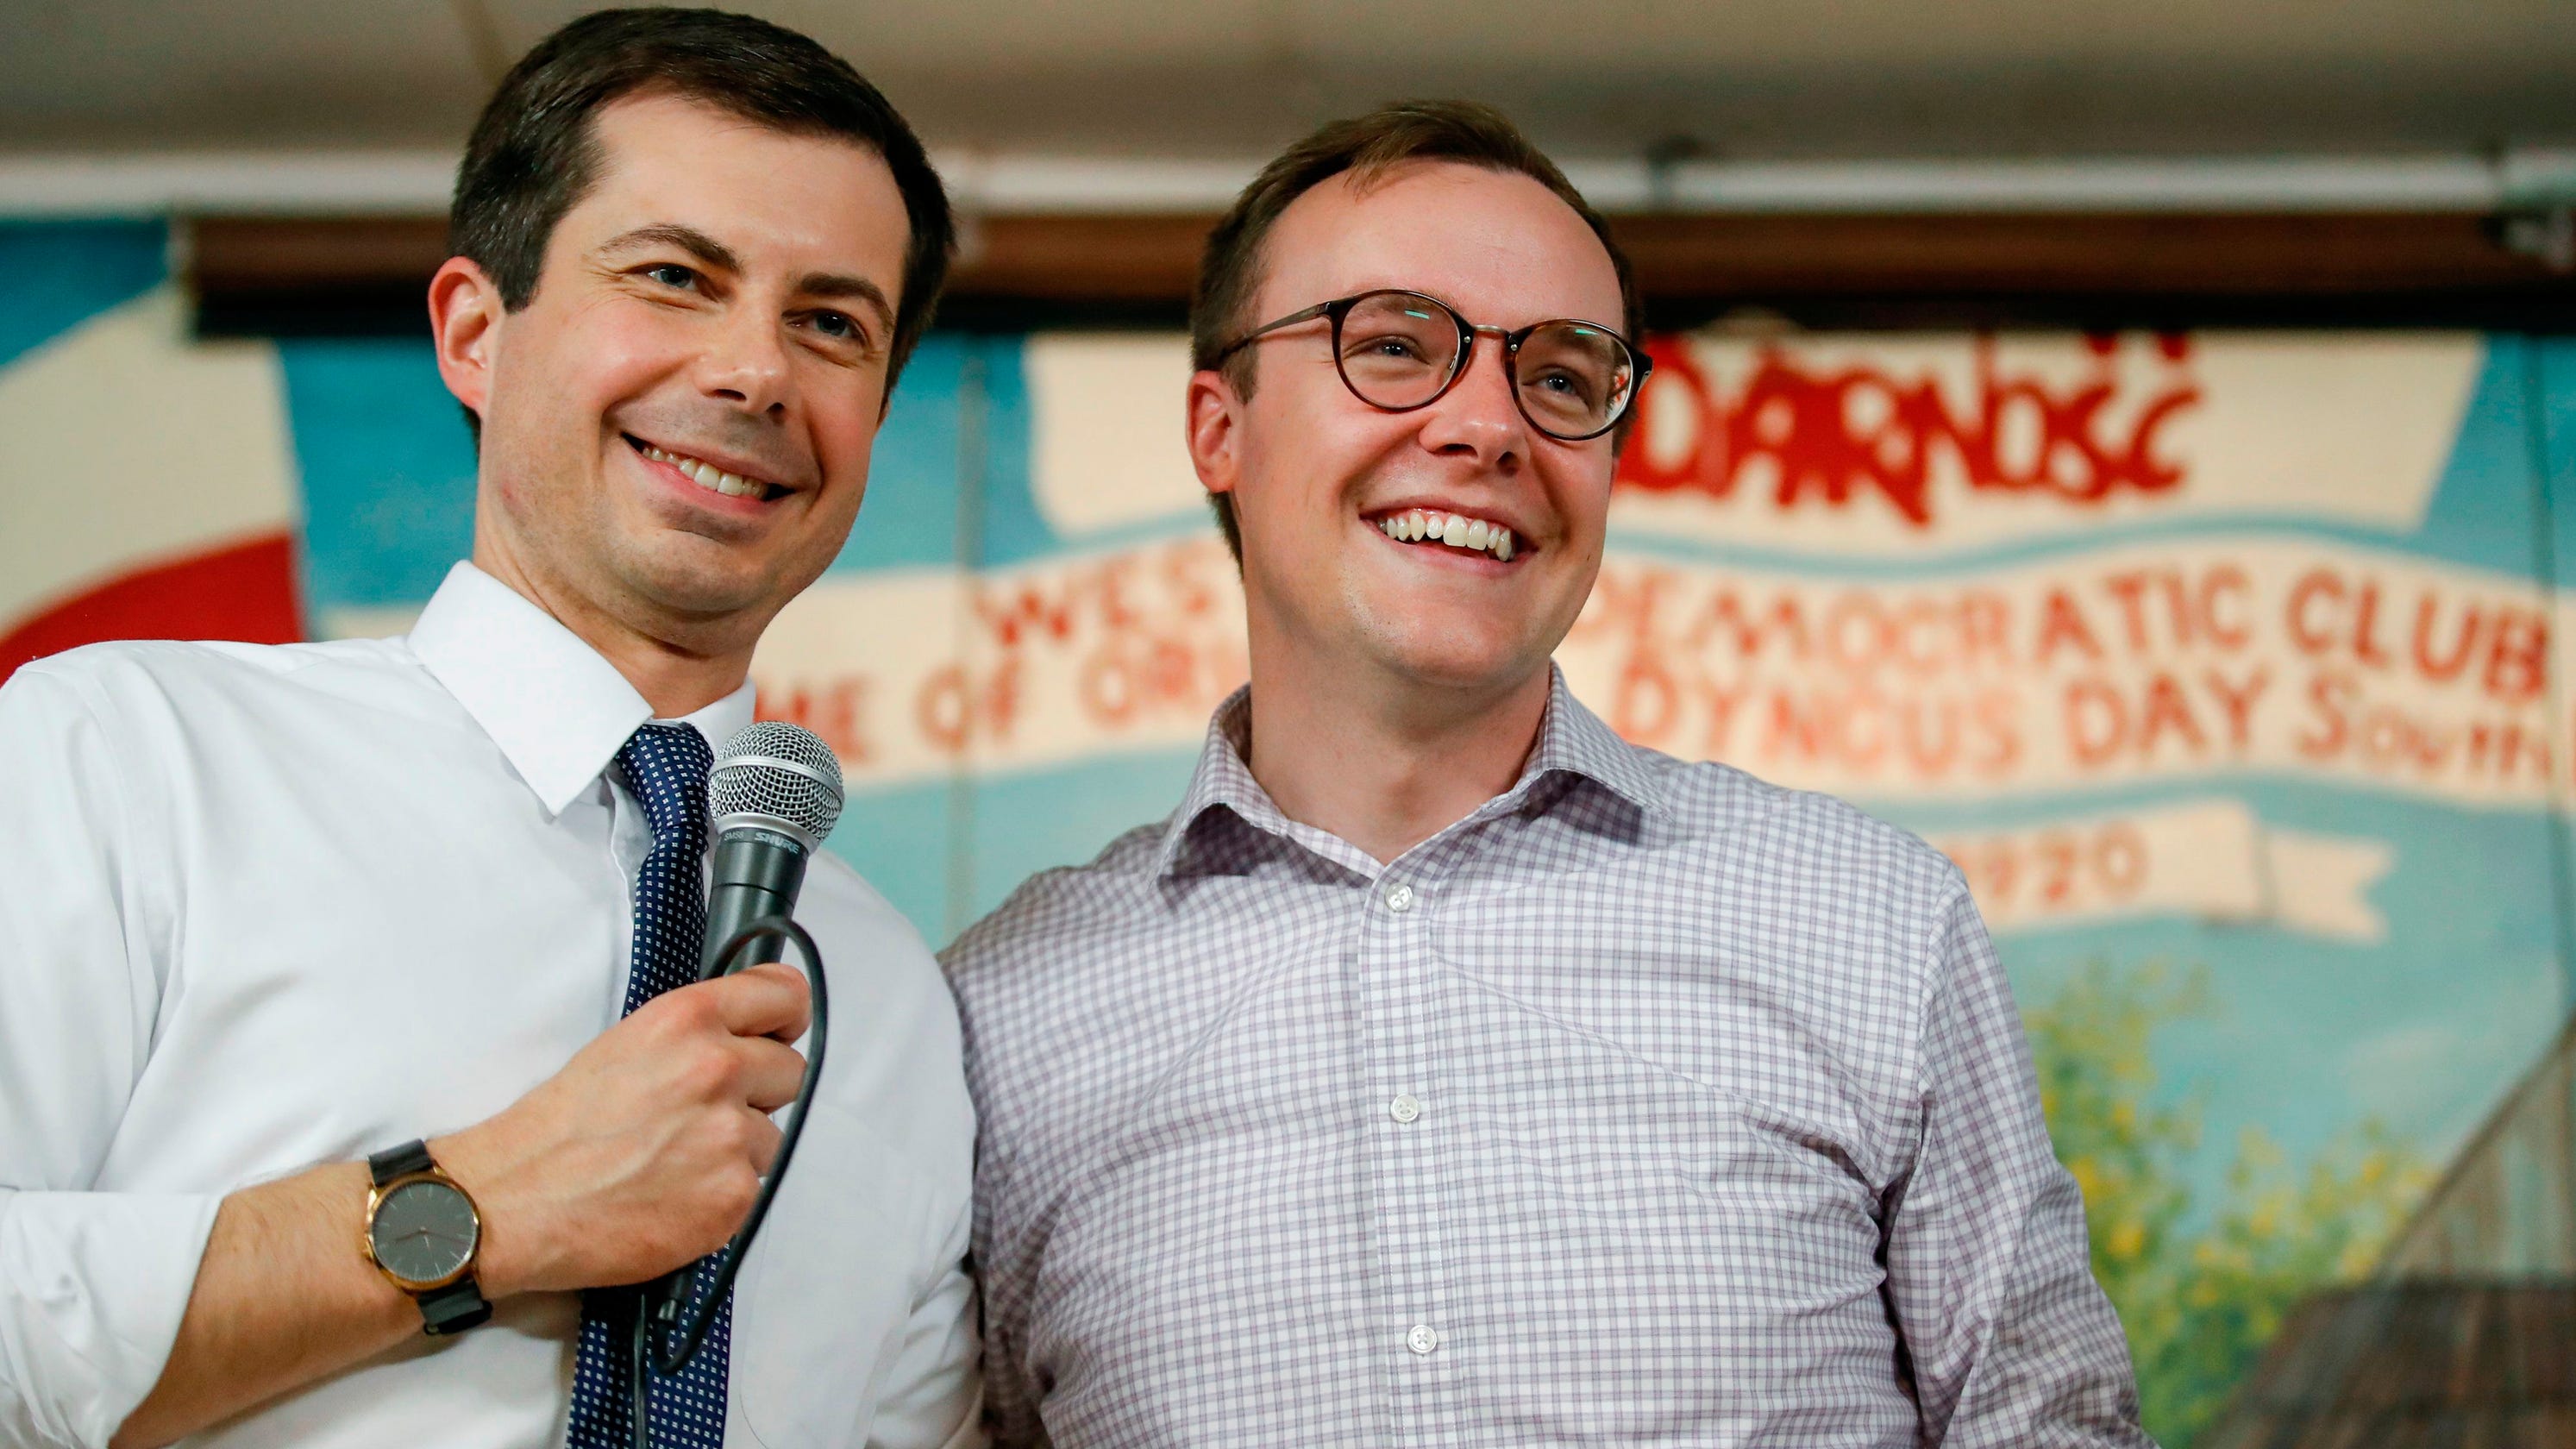 Pete Buttigieg and Supreme Court will test US progress on gay rights